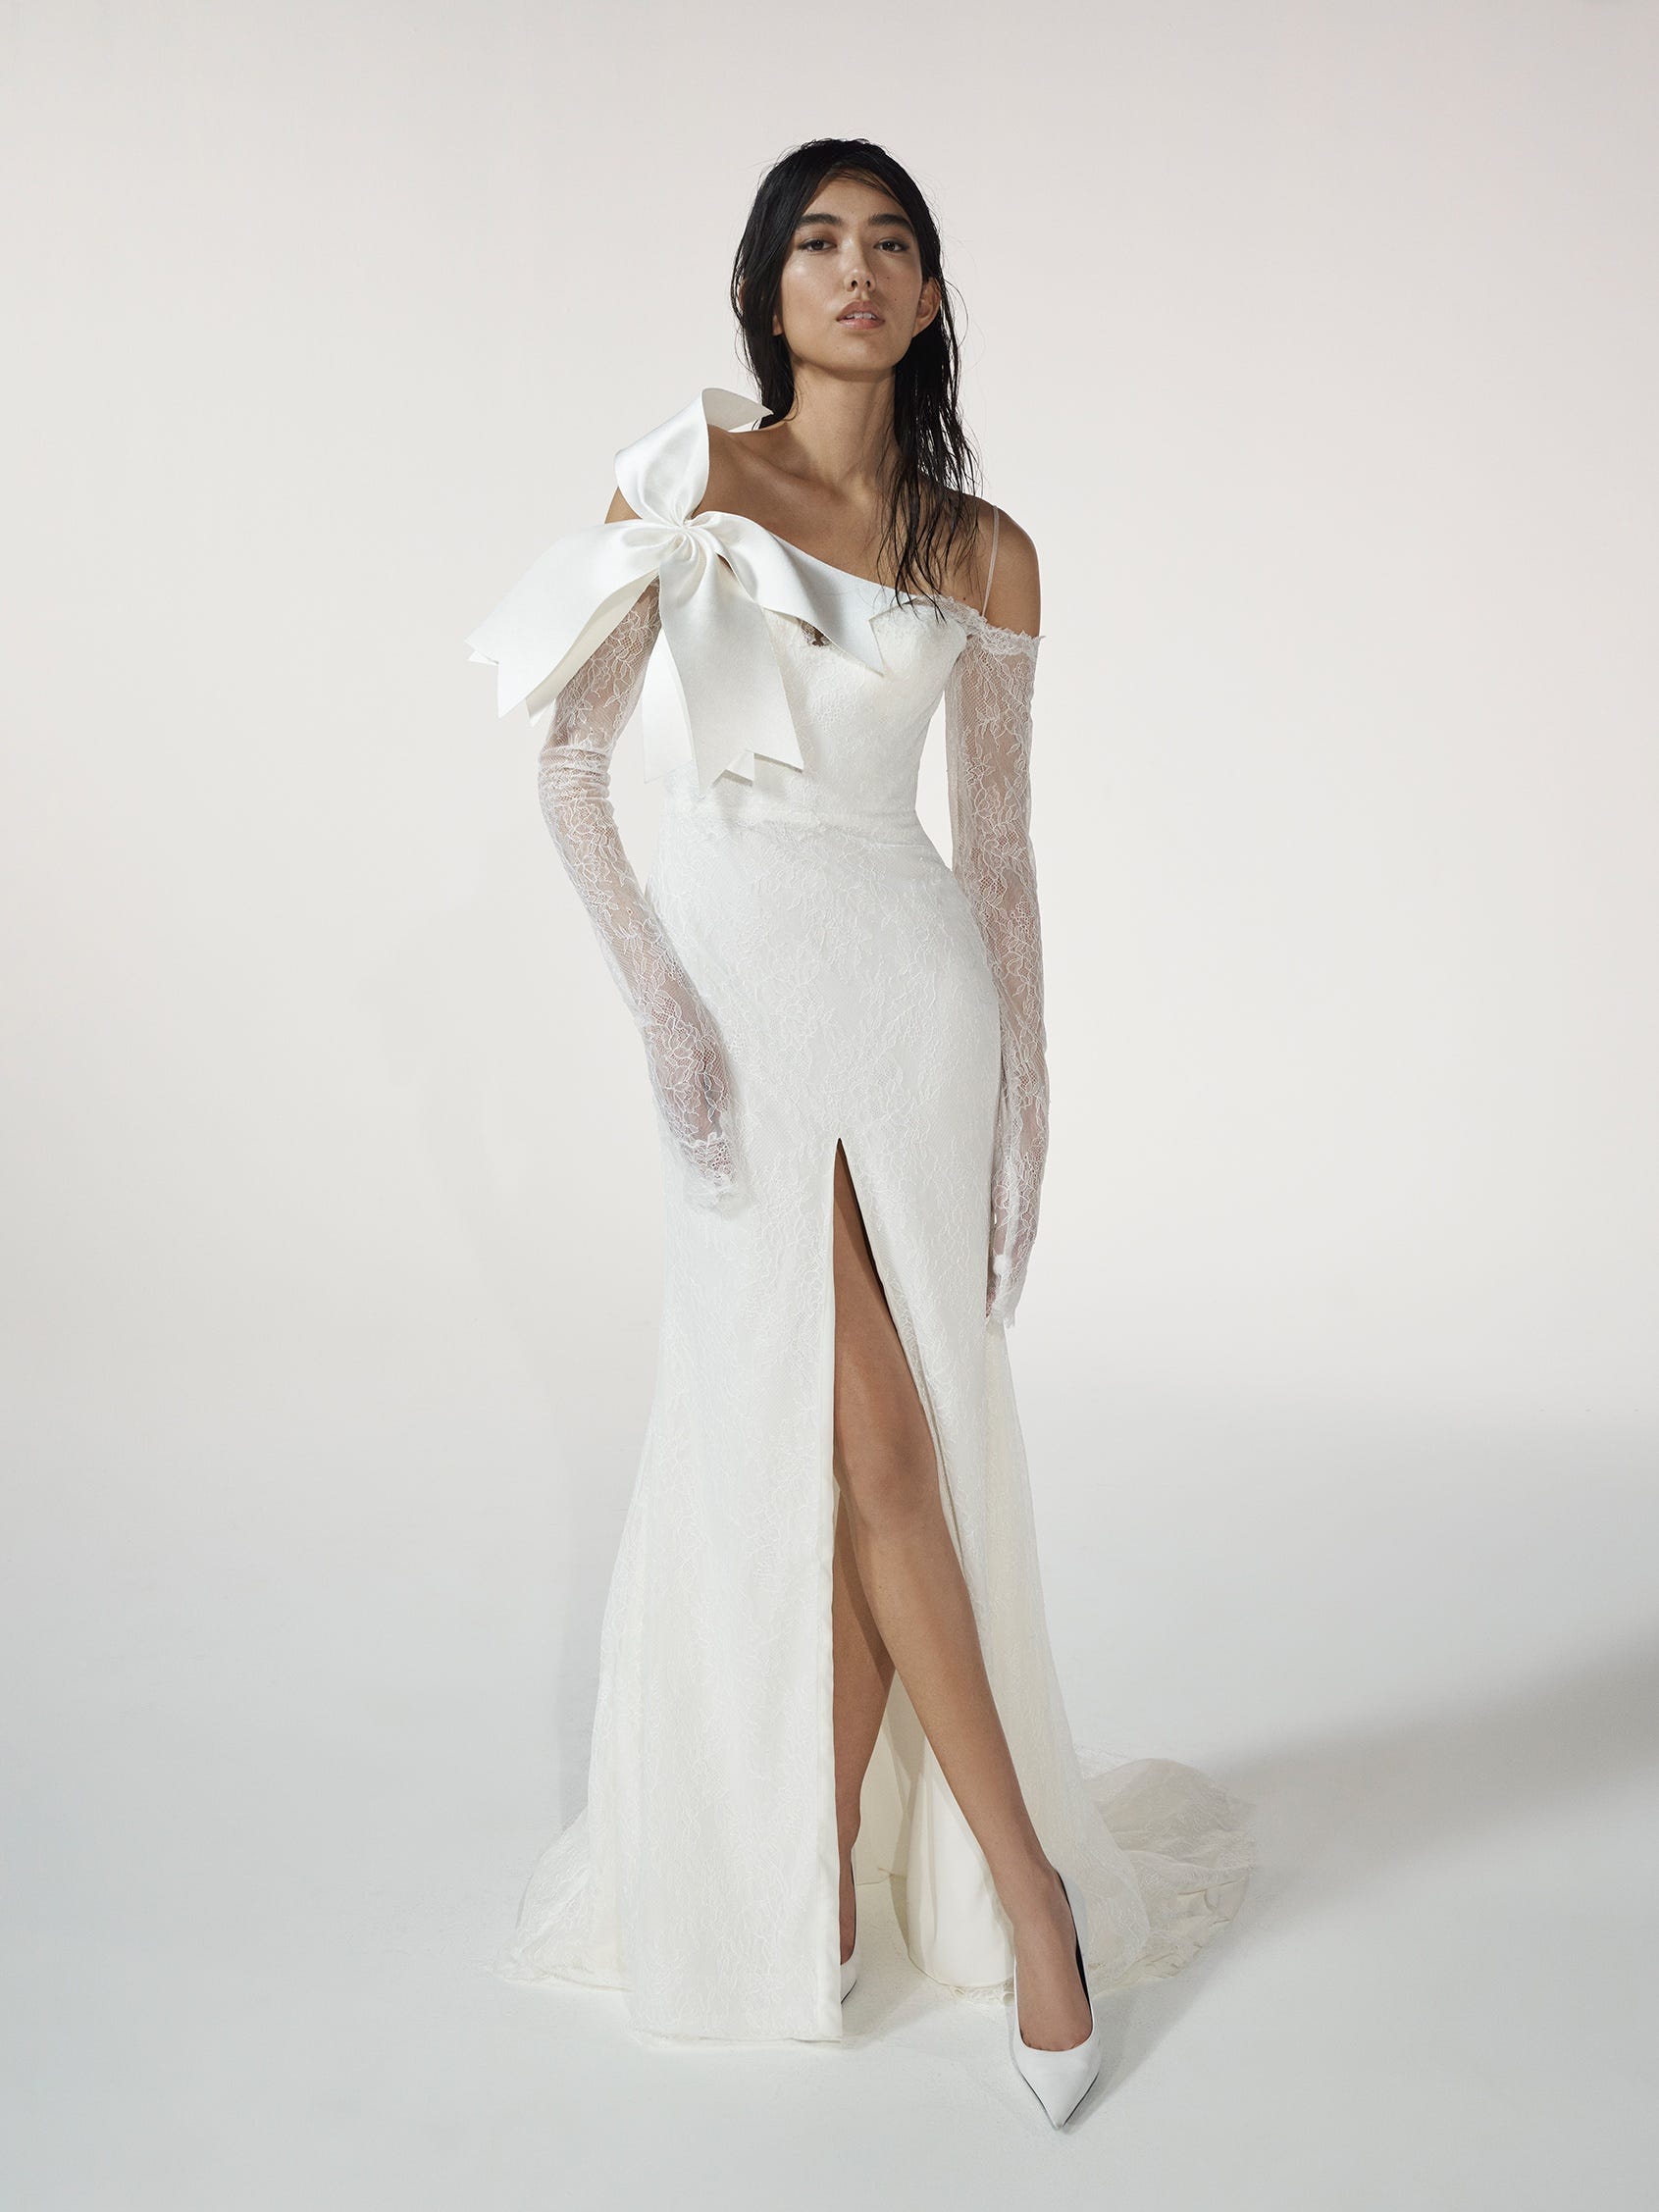 Vera Wang  Iconic Designer Gowns, Classic With A Fun Modern Edge - Rituals  of Love